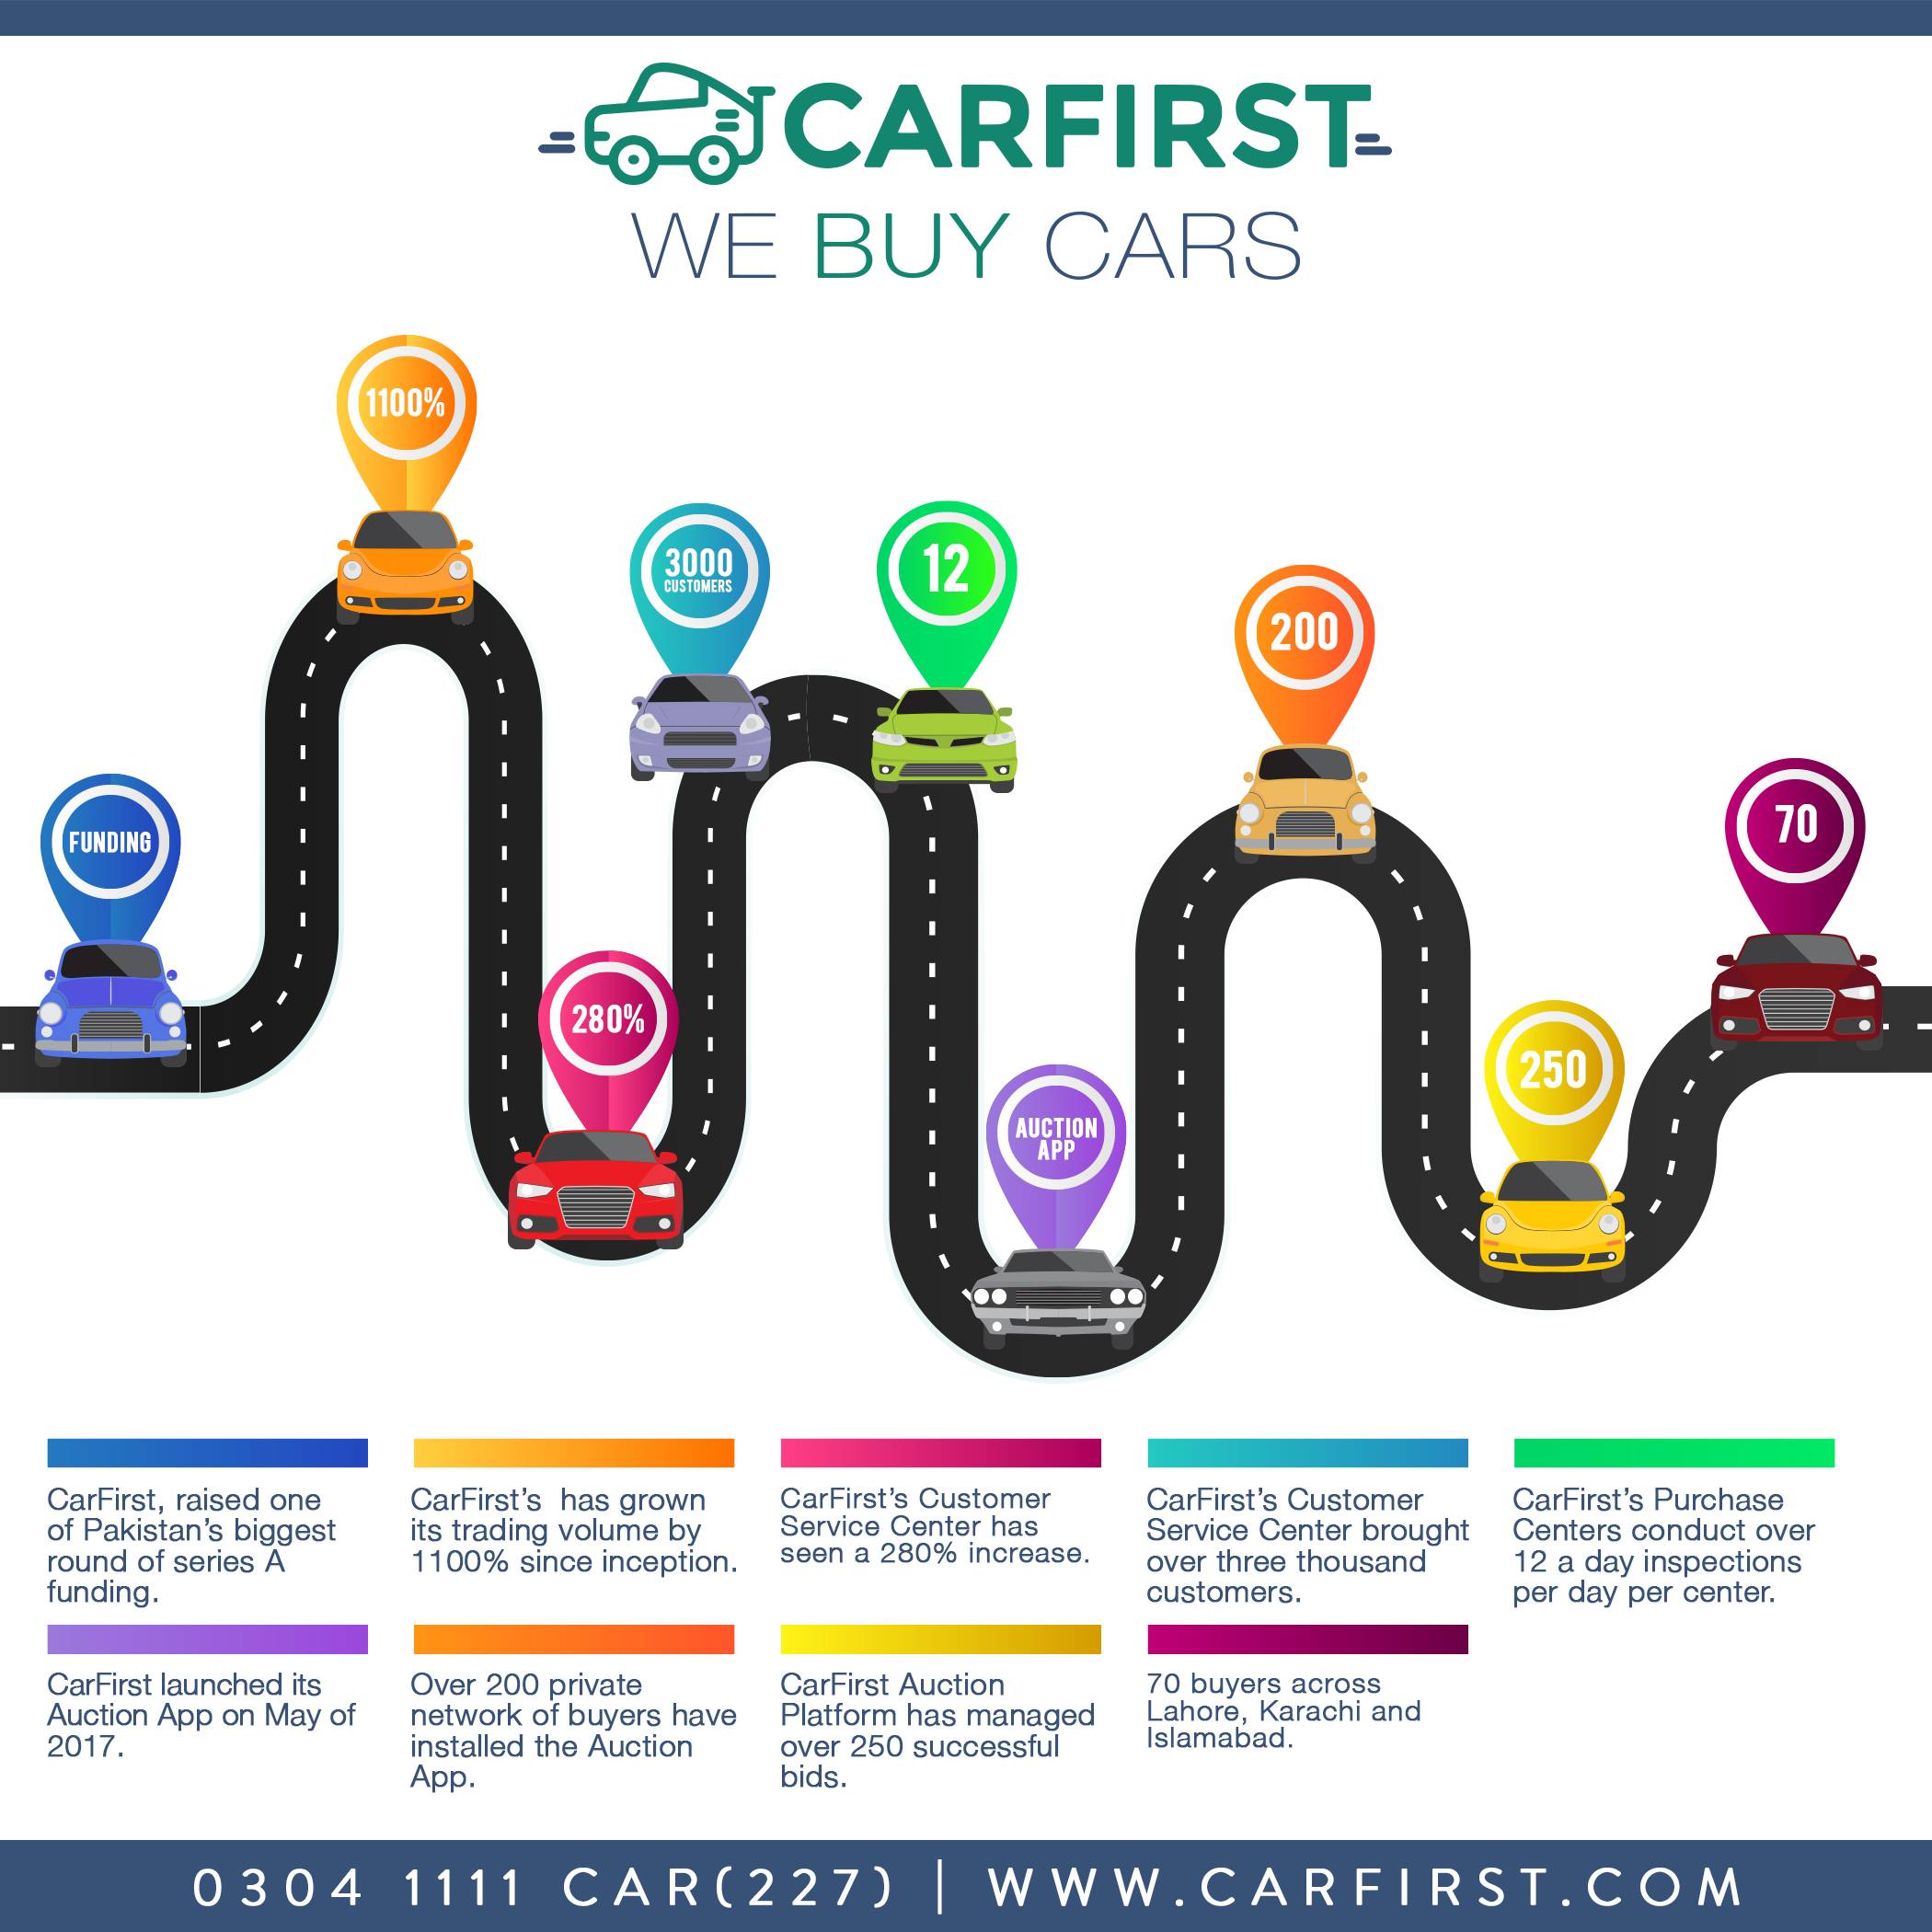 CARFIRST ACHIEVES TREMENDOUS GROWTH WITHIN FIRST SIX MONTHS